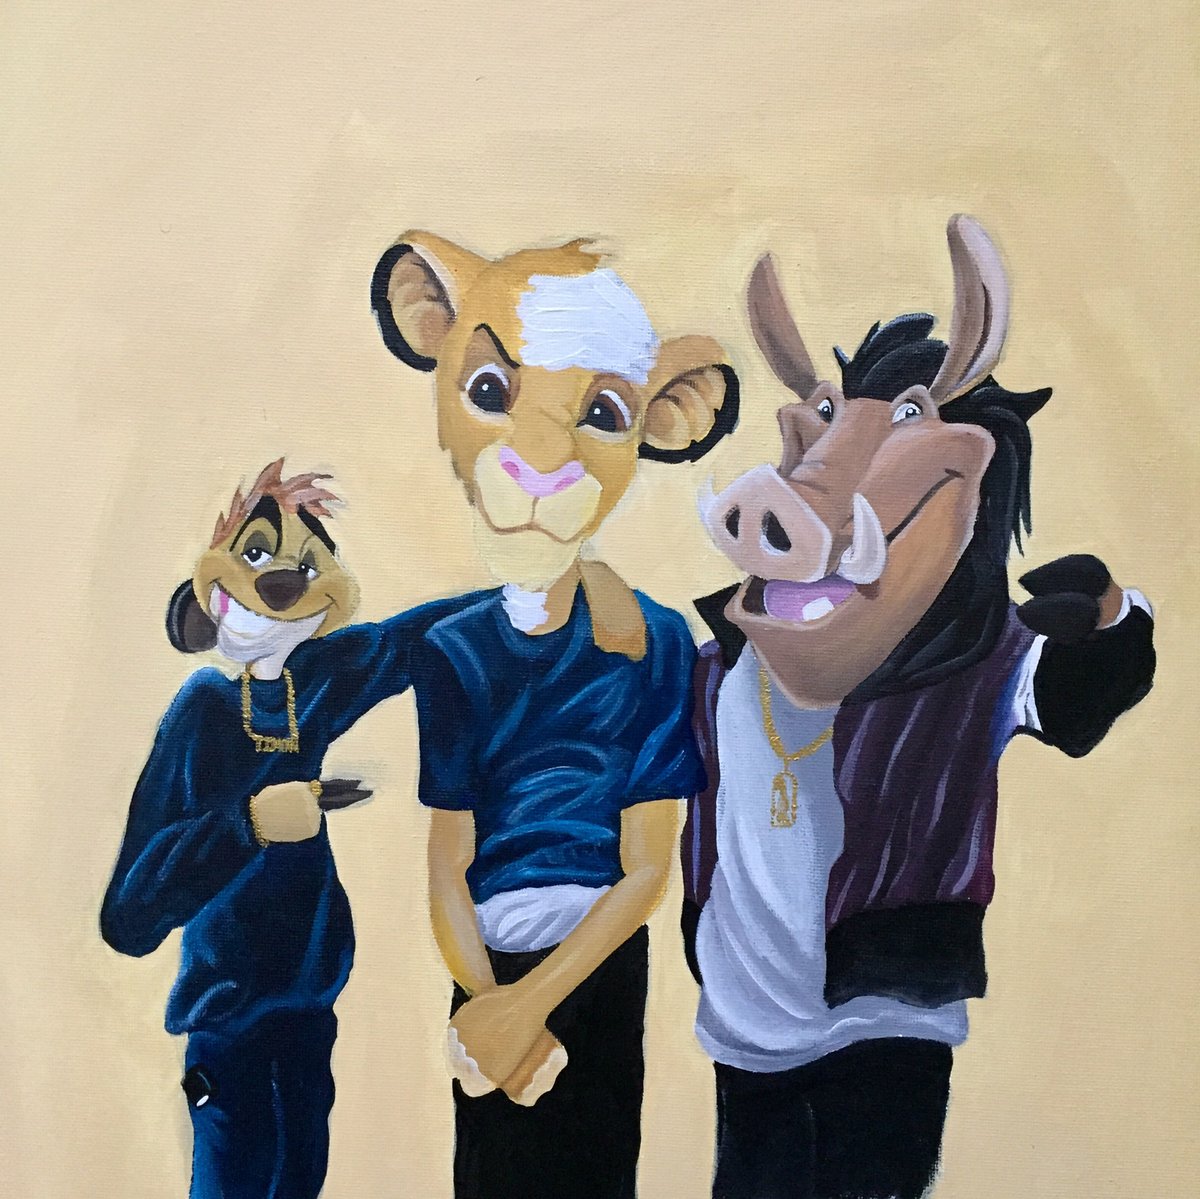 Image of "Classic Meets Classic: Paid In Full Meets Lion King"